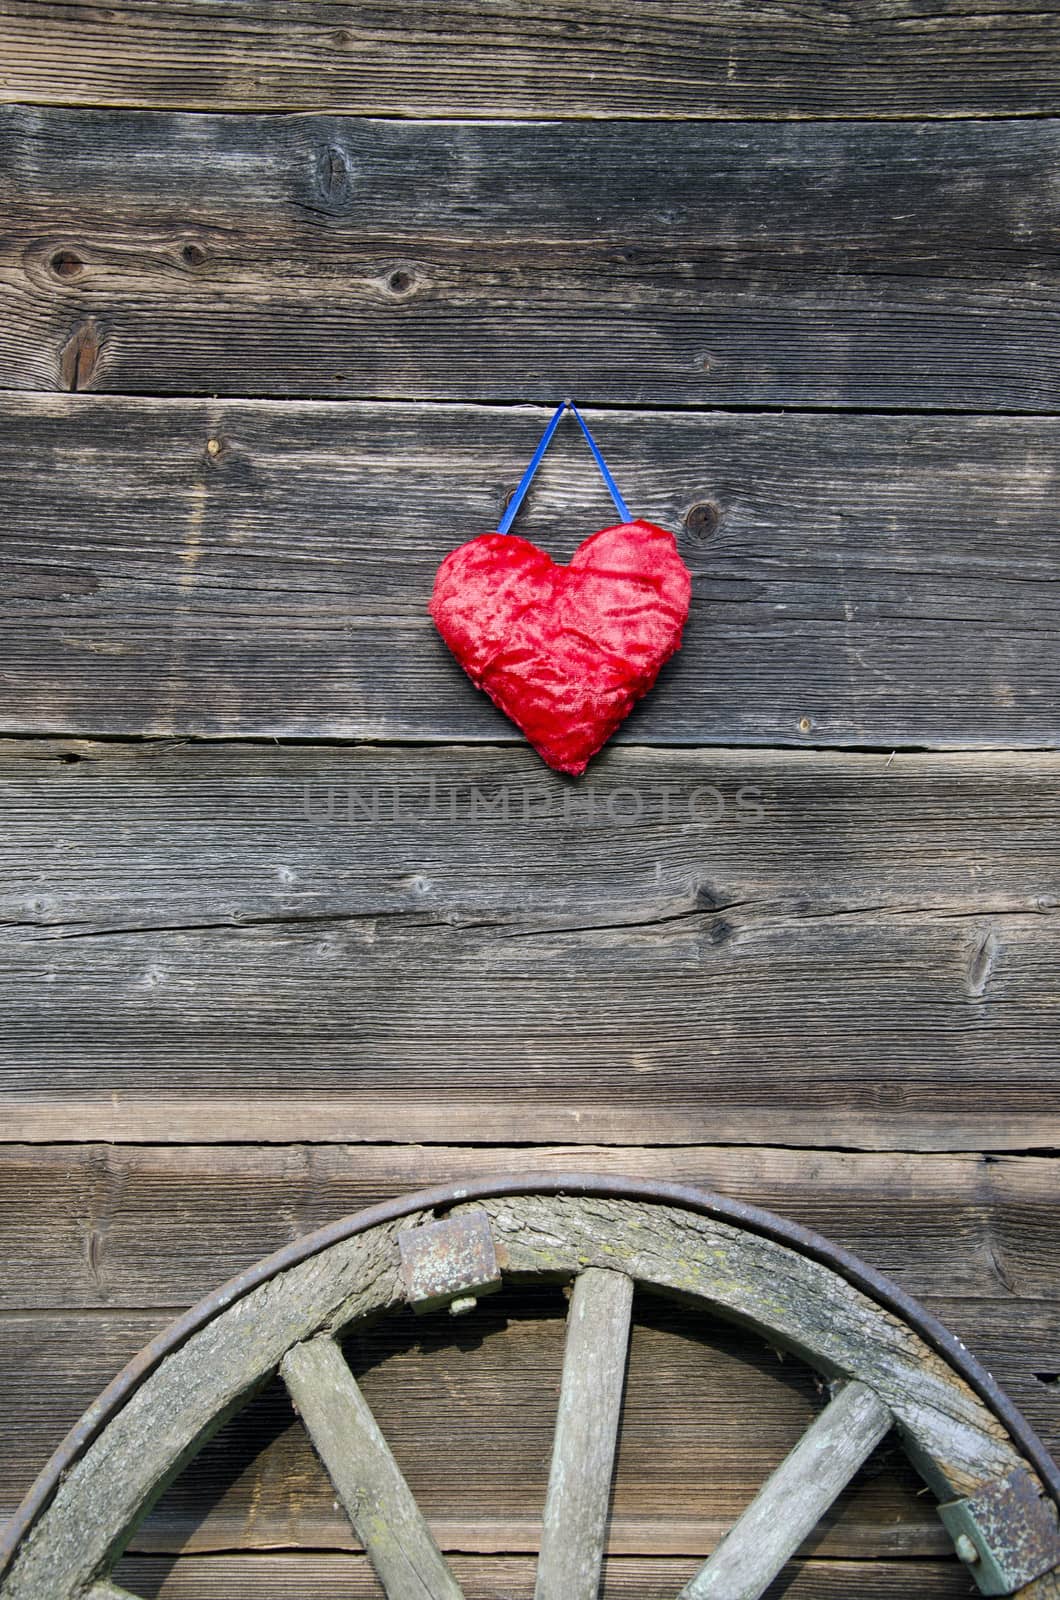 red heart symbol on old wooden bartn wall and horse carriage wheel